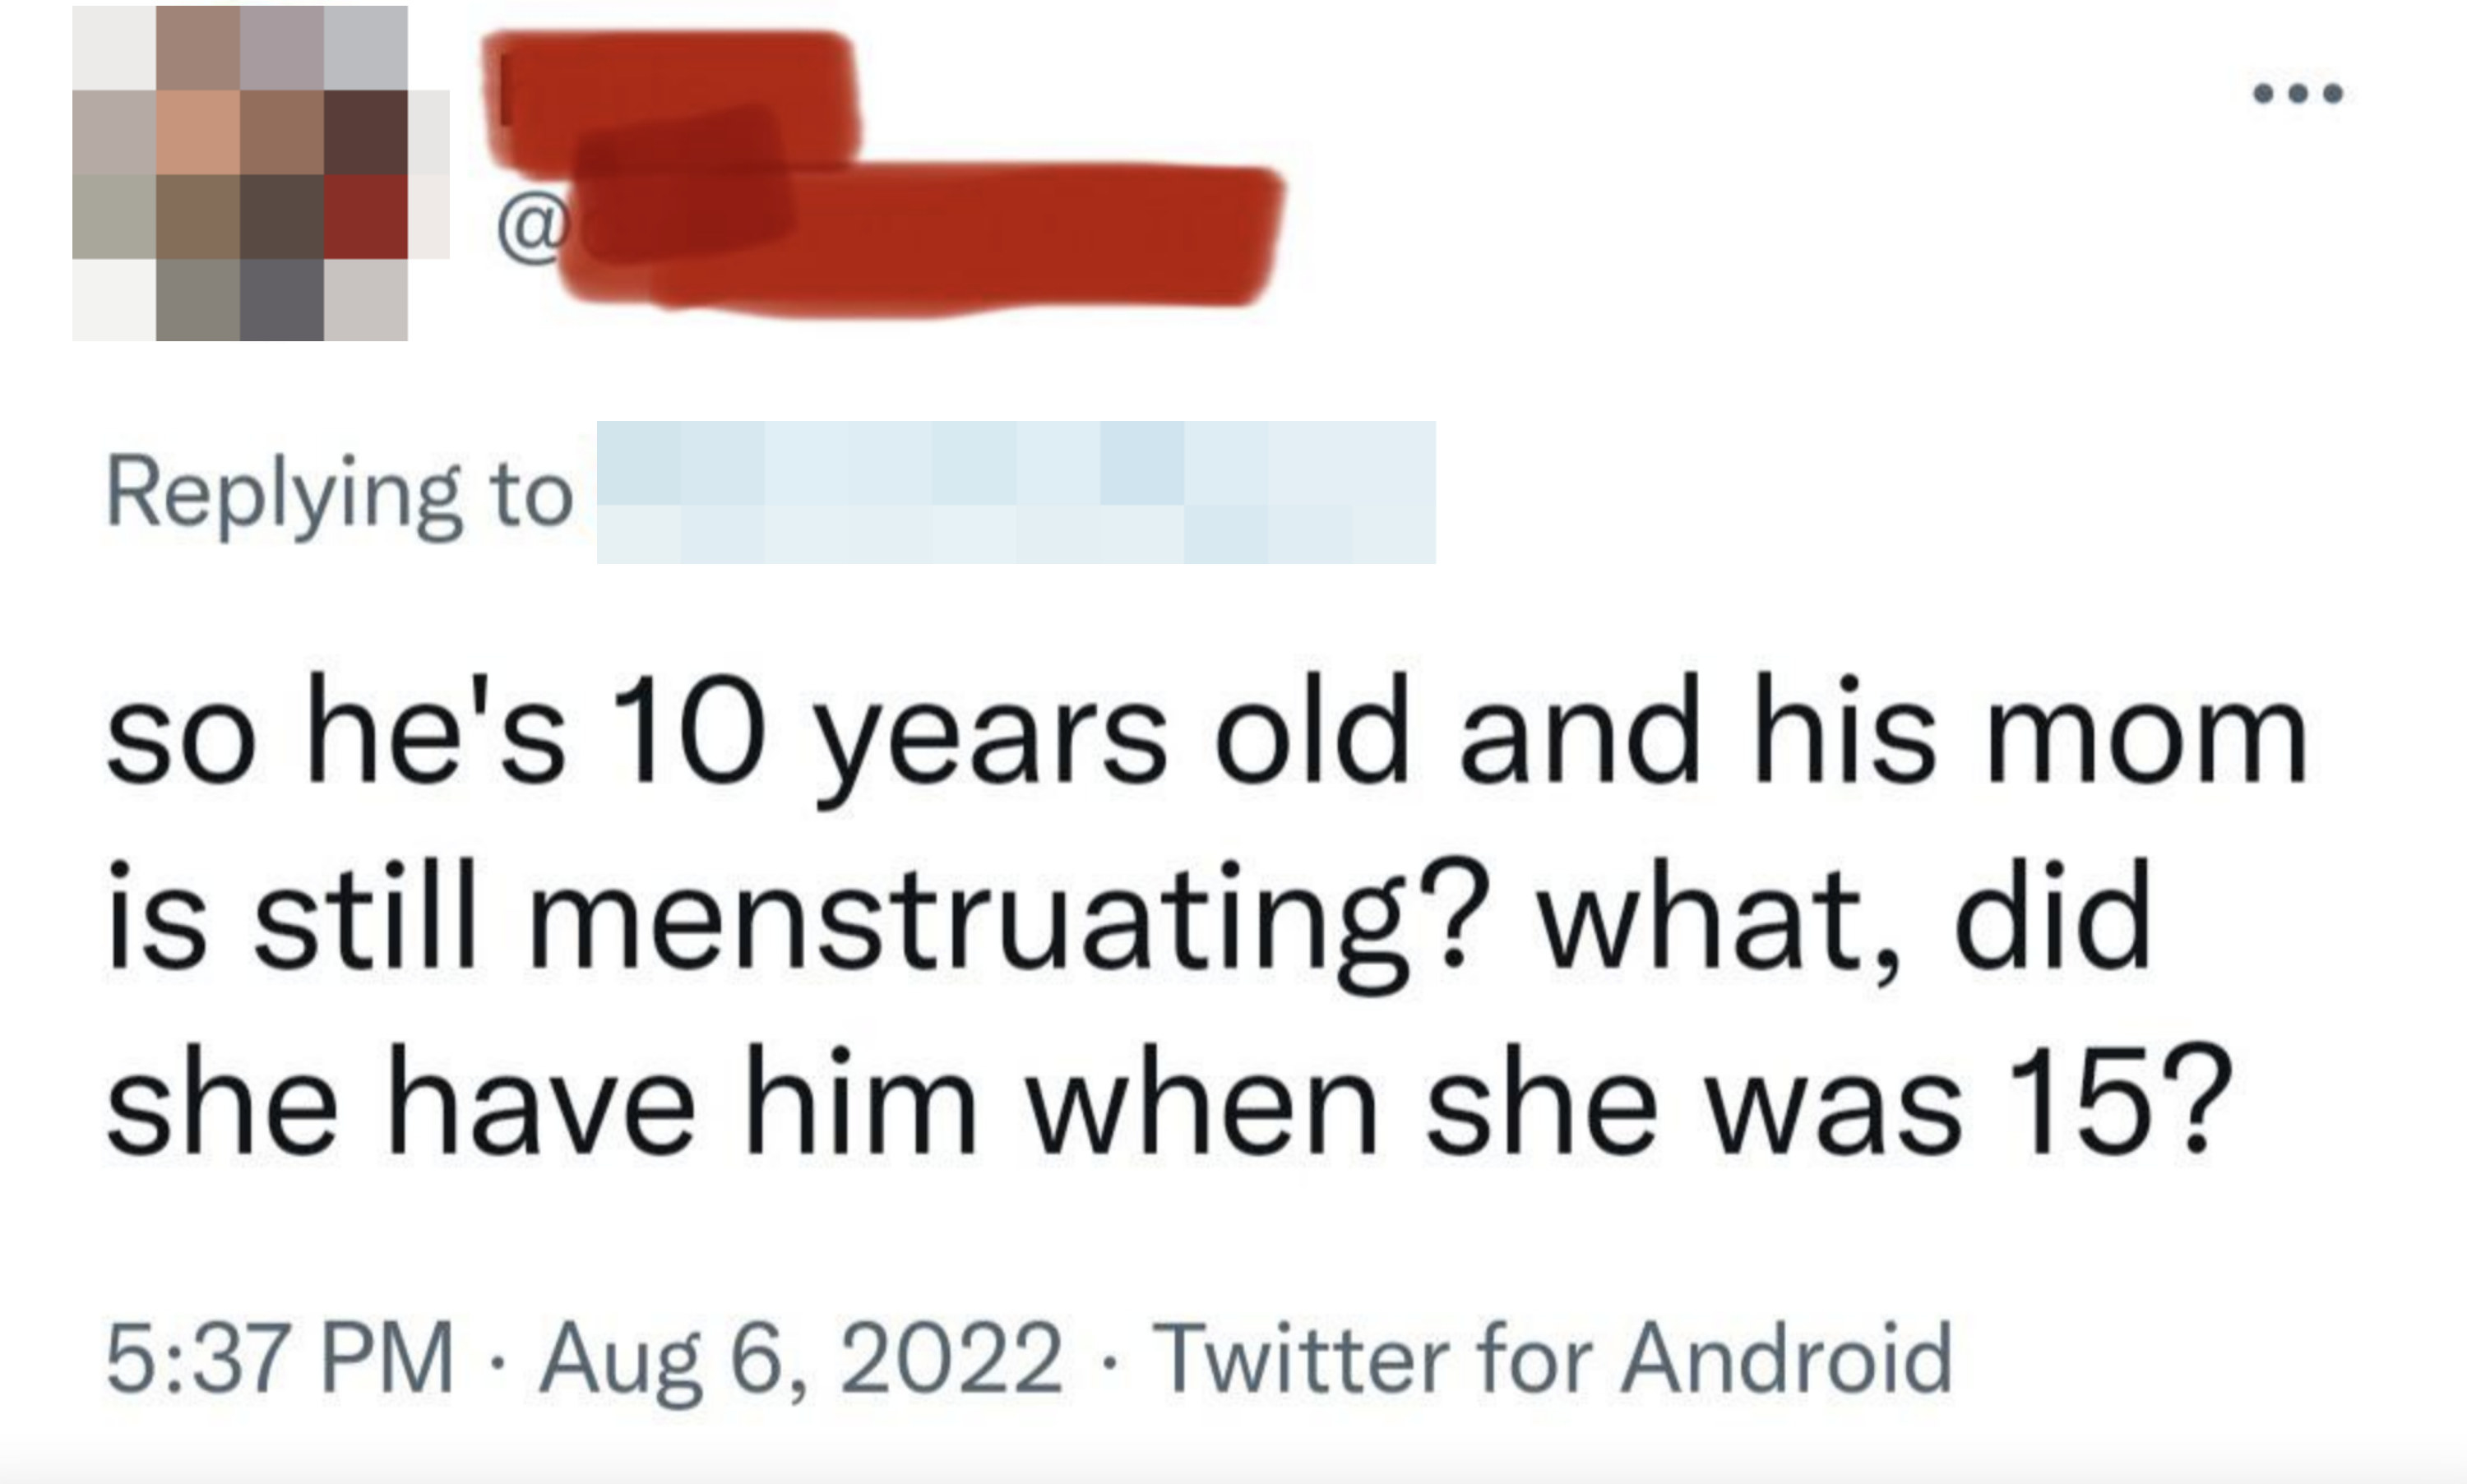 &quot;so he&#x27;s 10 years old and his mom is still menstruating?&quot;